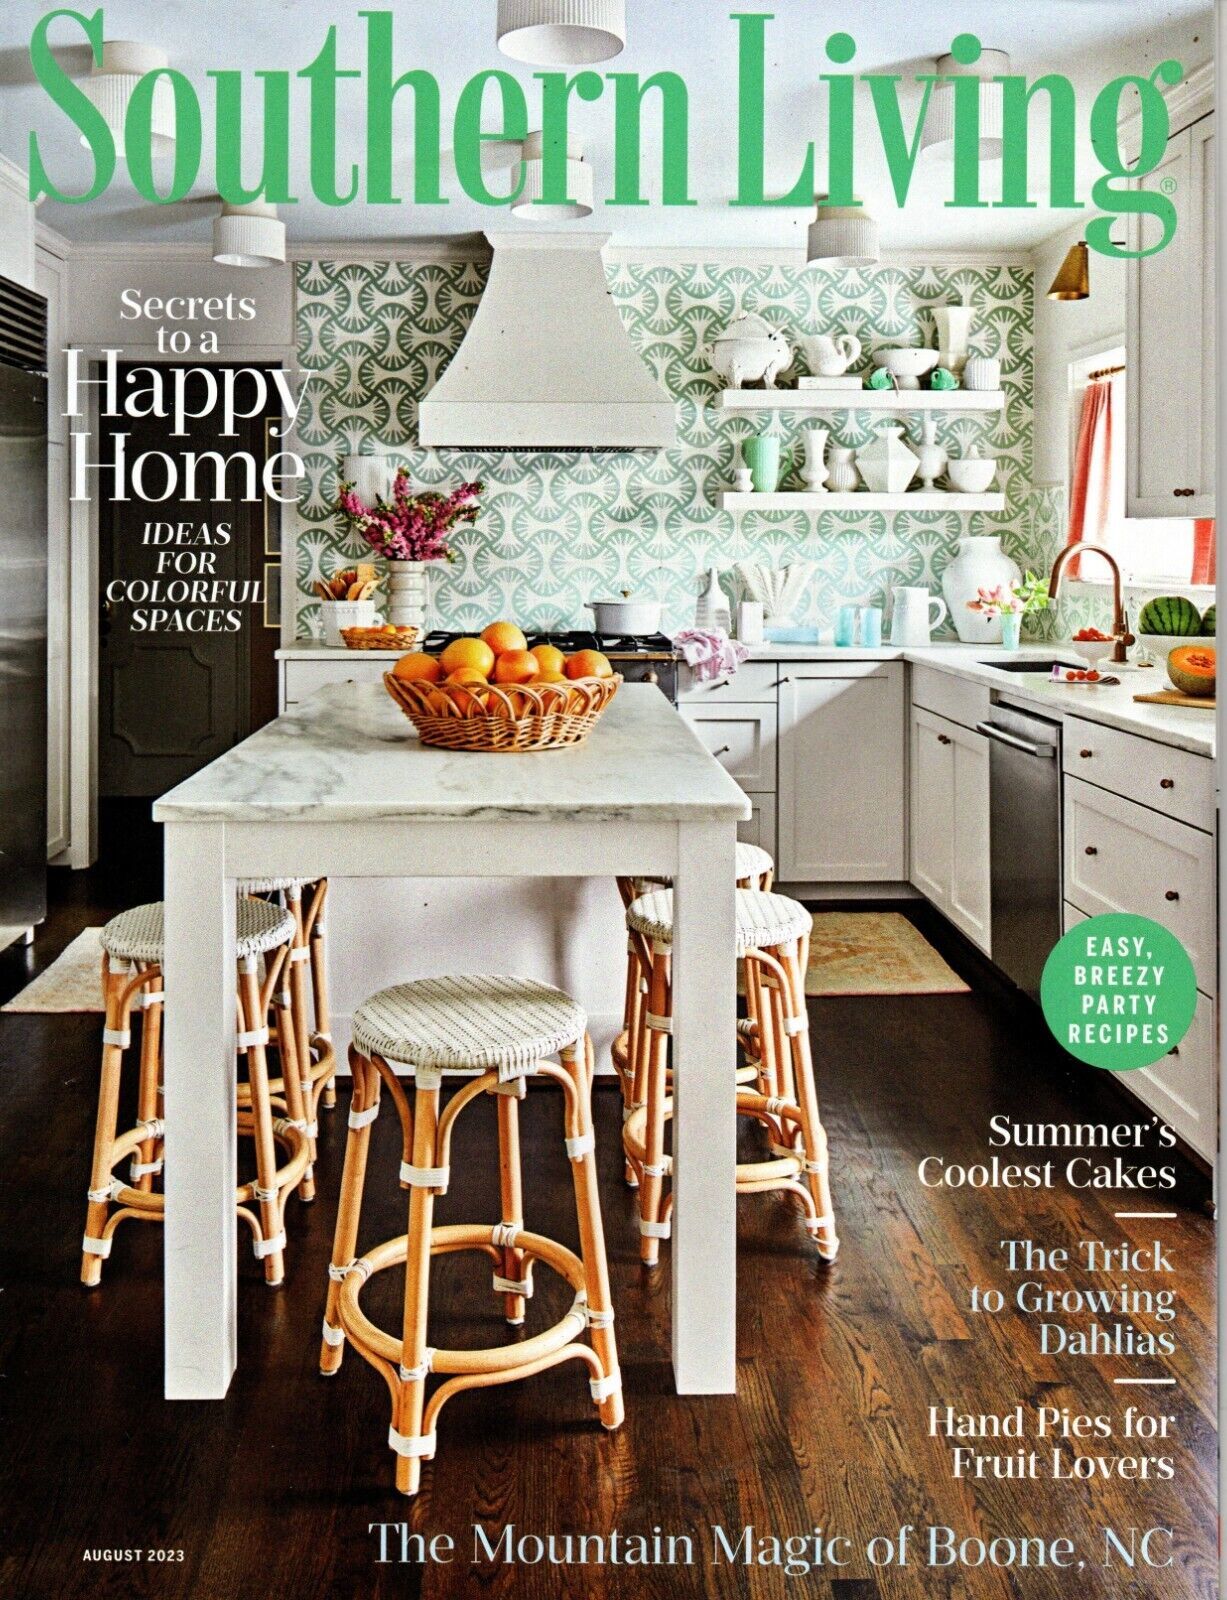 Primary image for Southern Living Magazine August 2023 Secrets to a Happy Home